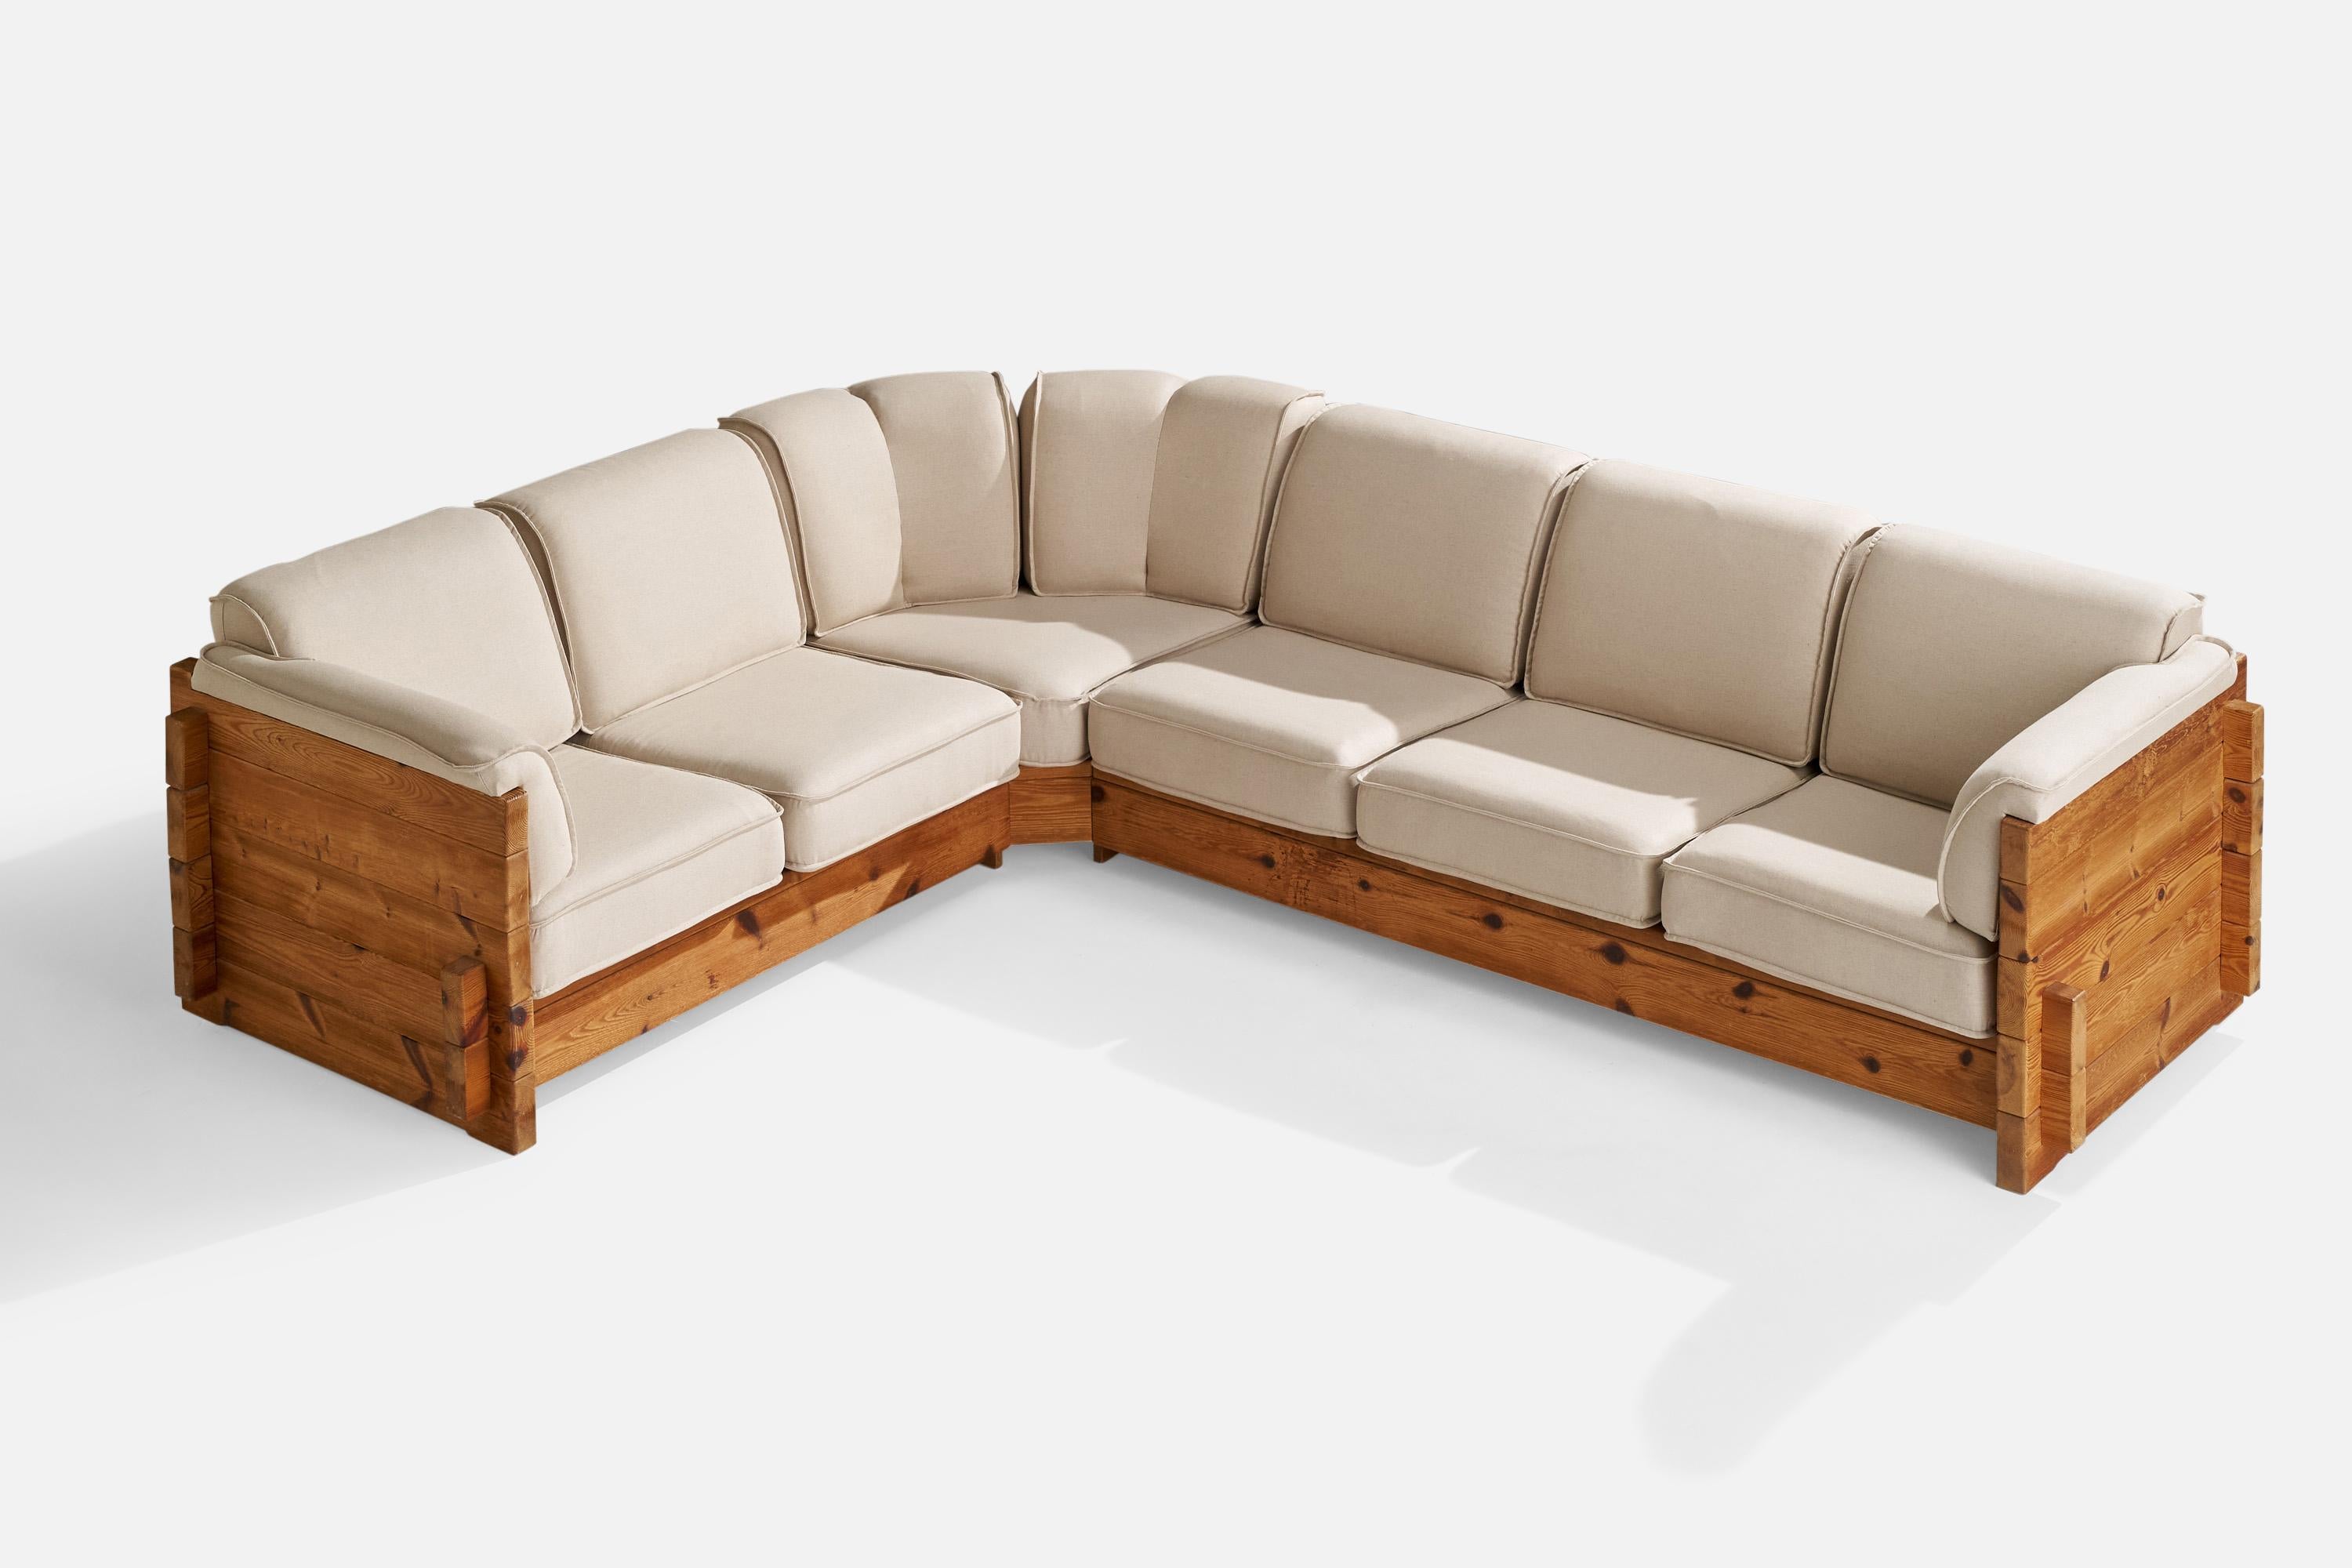 A sizeable sectional pine and off white fabric sofa attributed to Roland Wilhelmsson, Sweden, 1970s.

Seat height 16”.